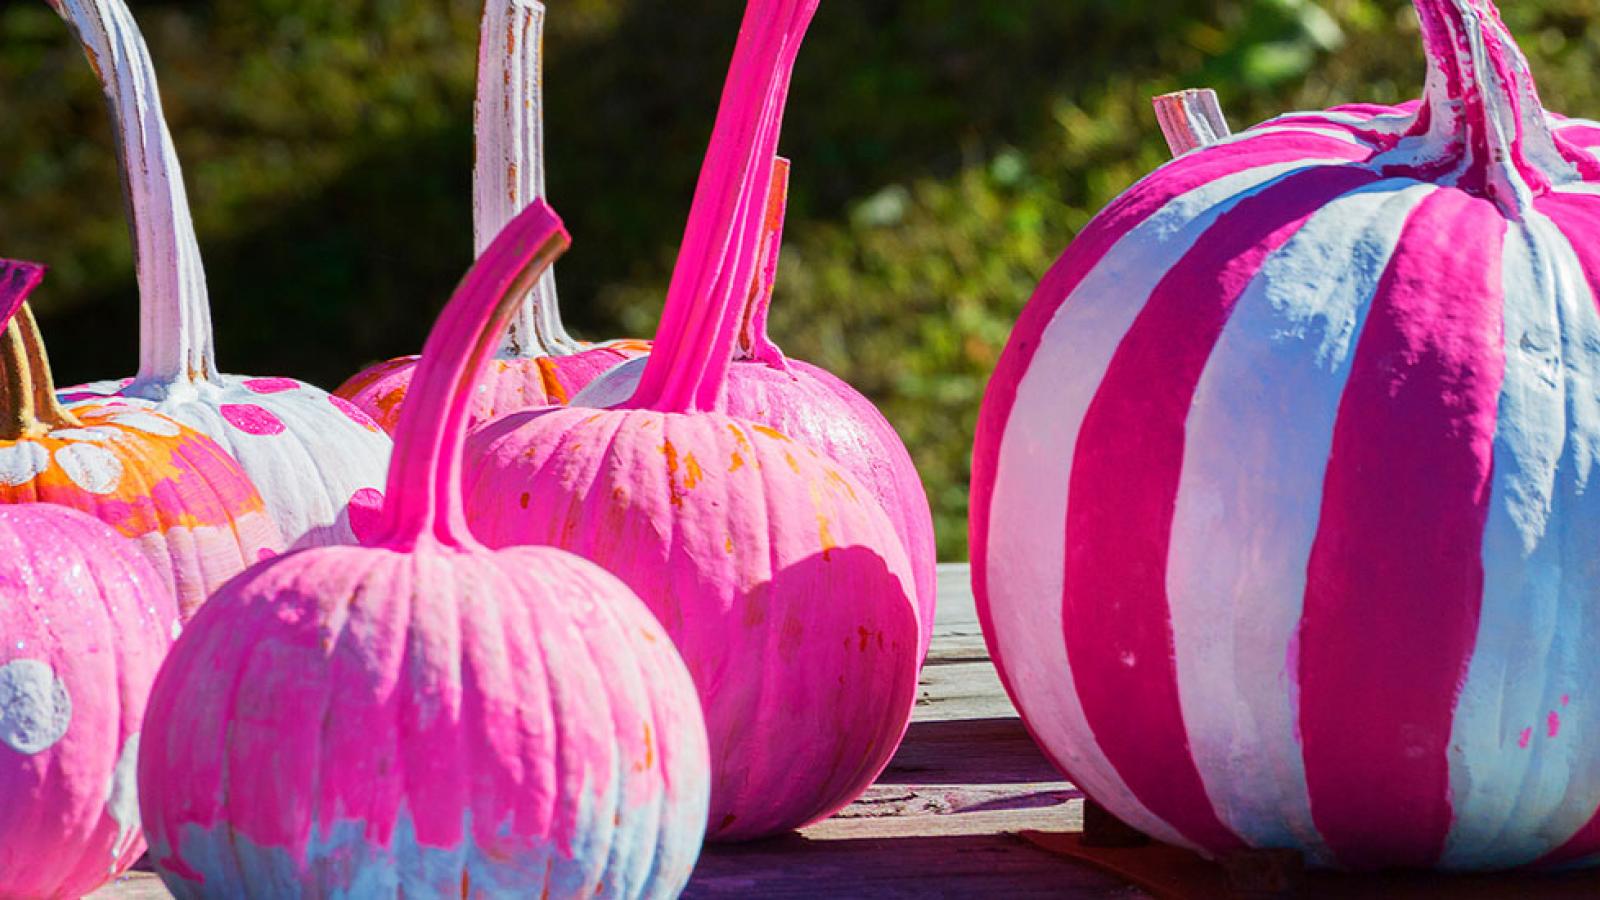 Breast Cancer Awareness Month Paint The Pumpkins Pink Contest!